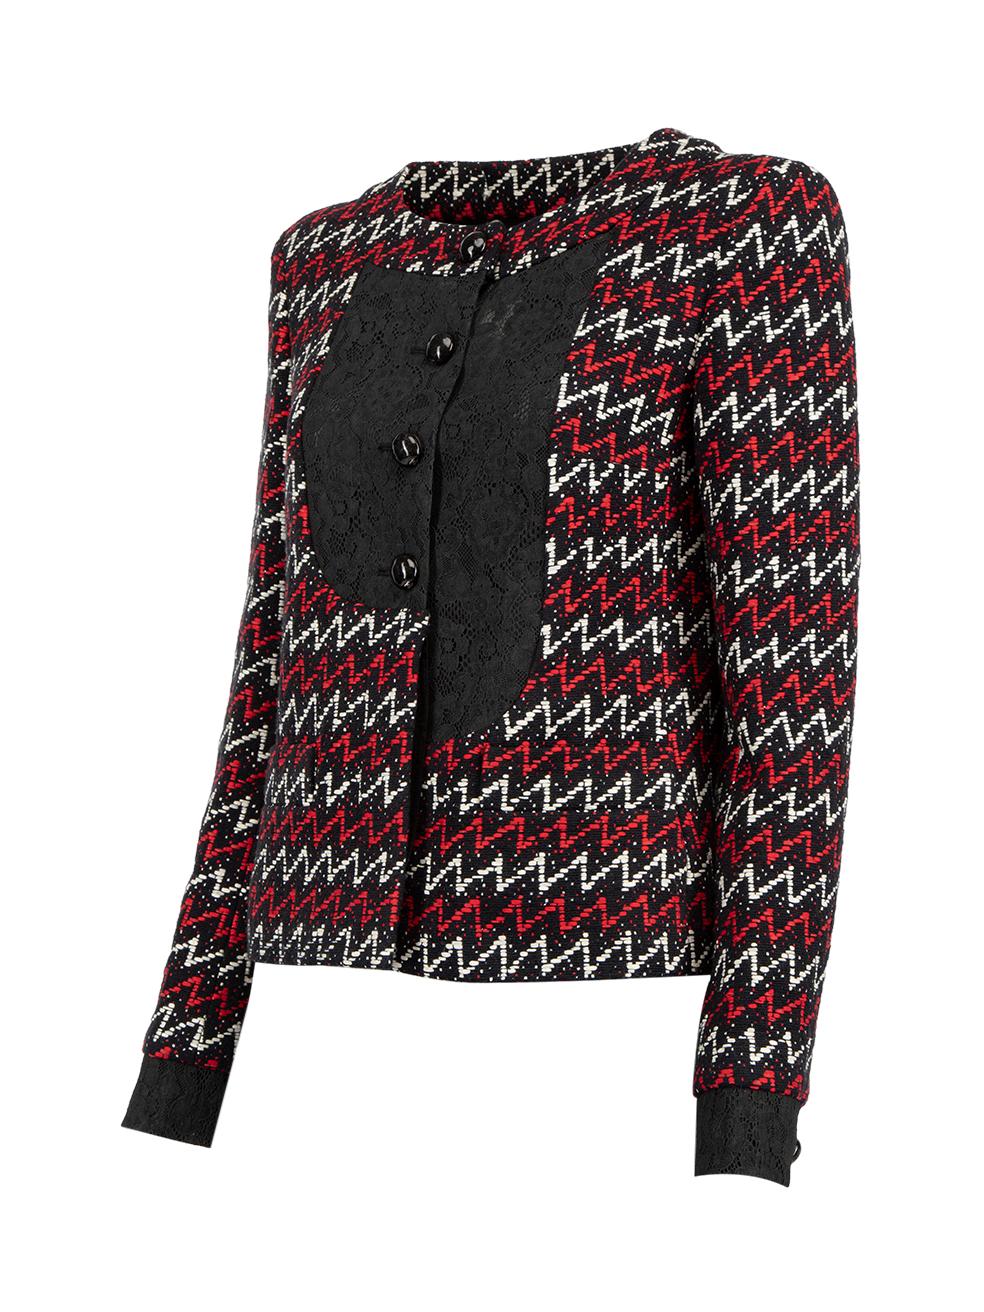 Chanel Women's SS 2015 Tweed CC Button Jacket 1